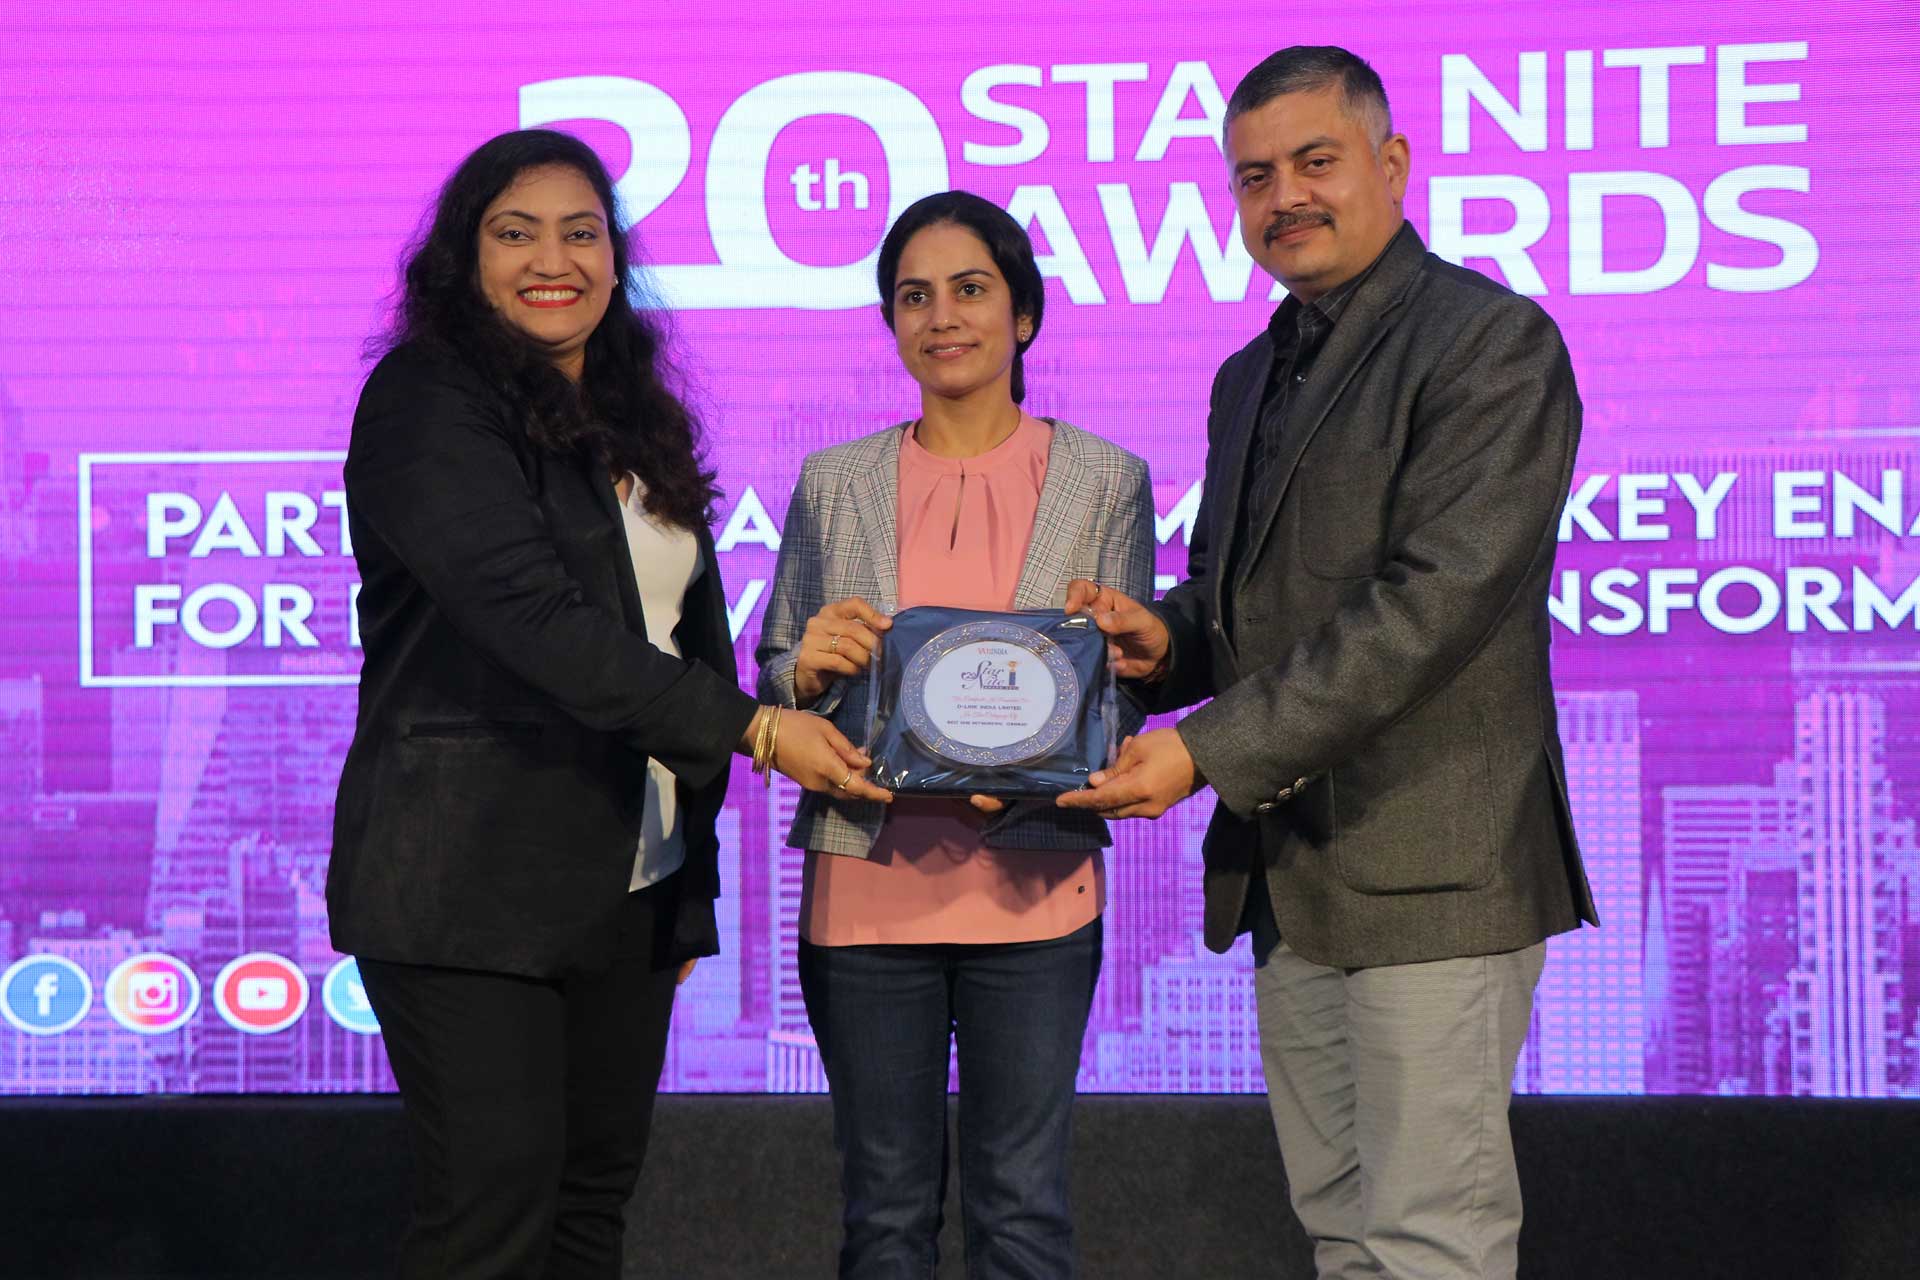 Best SMB Networking Company Award goes to  D-LINK India Limited at 20th Star Nite Awards 2021